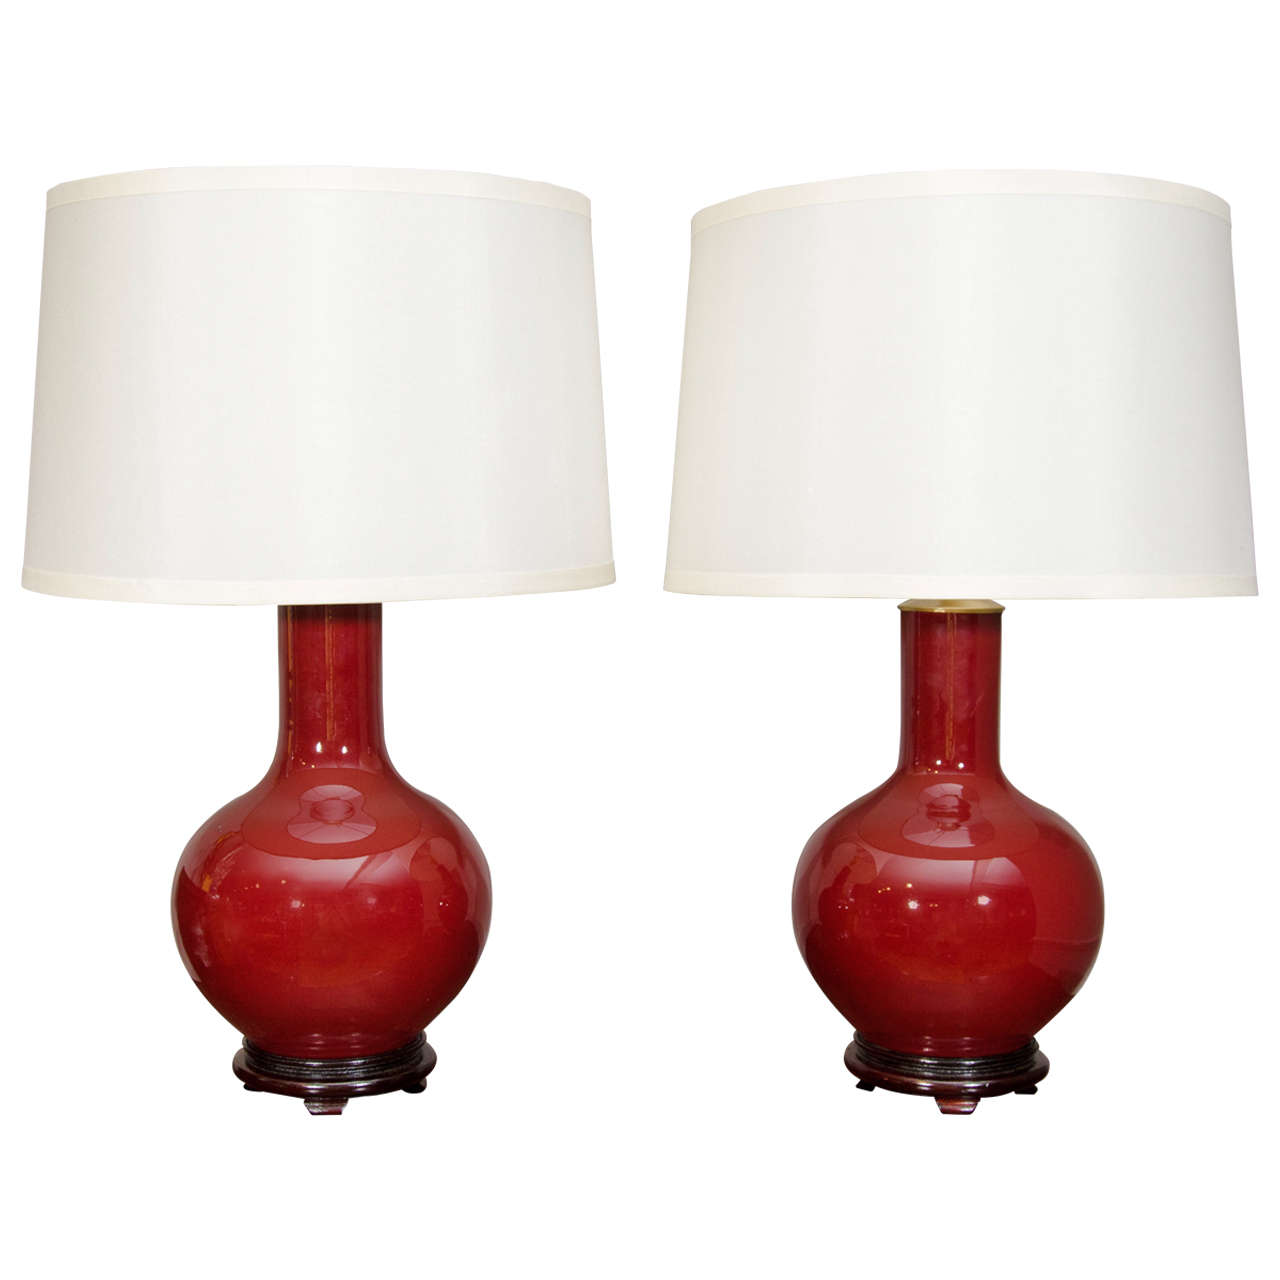 Pair of Chinese Oxblood Globular Shaped Lamps